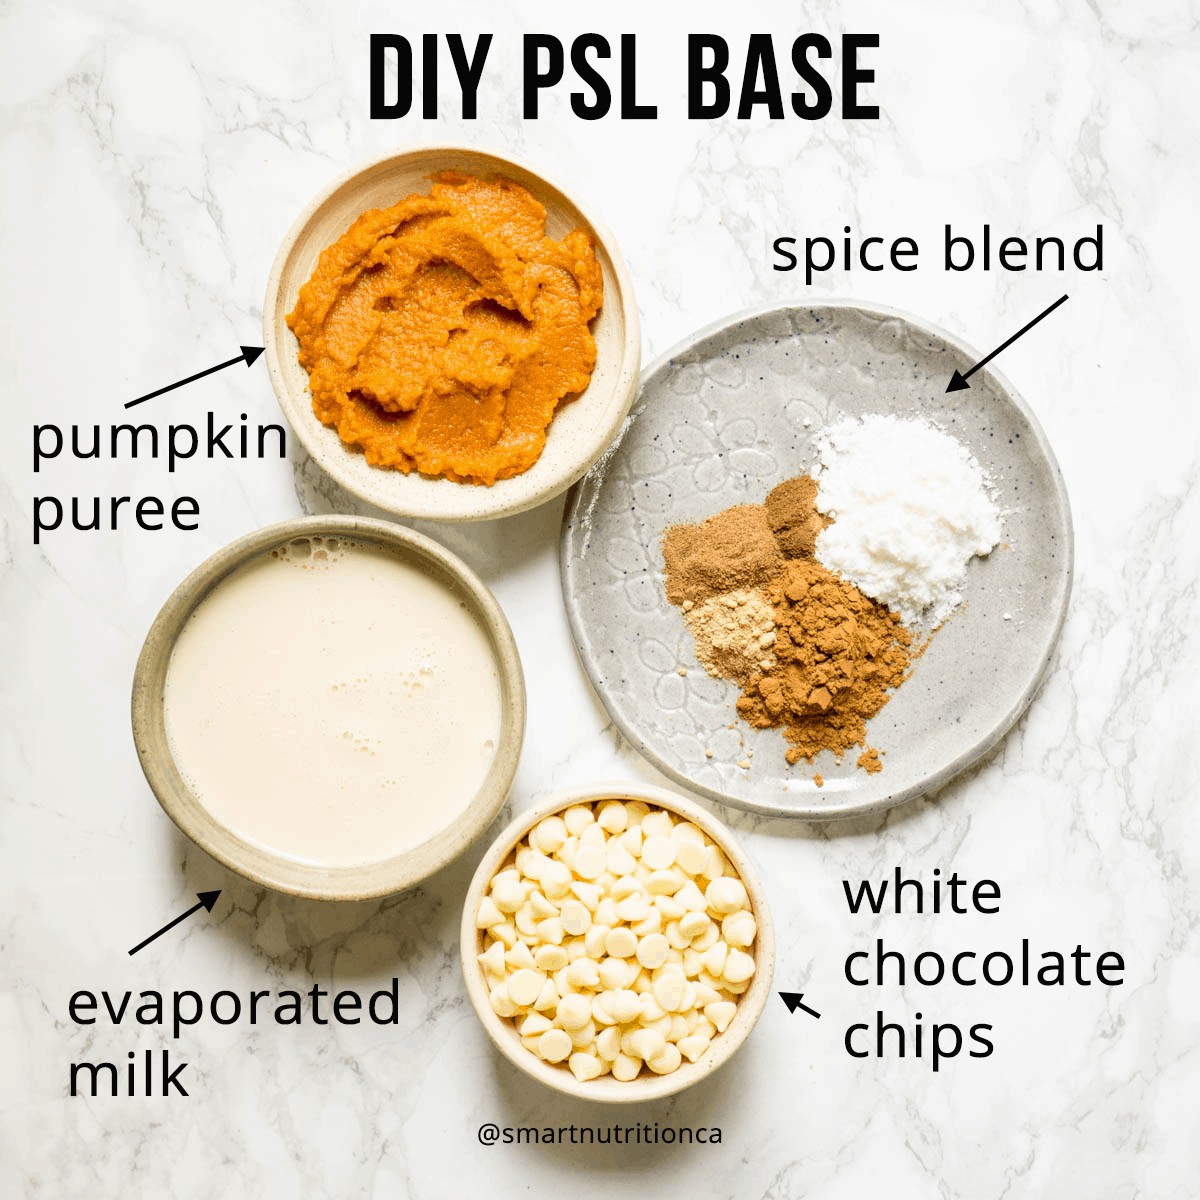 A flat lay image of pumpkins spice sauce ingredients including pumpkin puree, spice blend, white chocolate chips, and evaporated milk